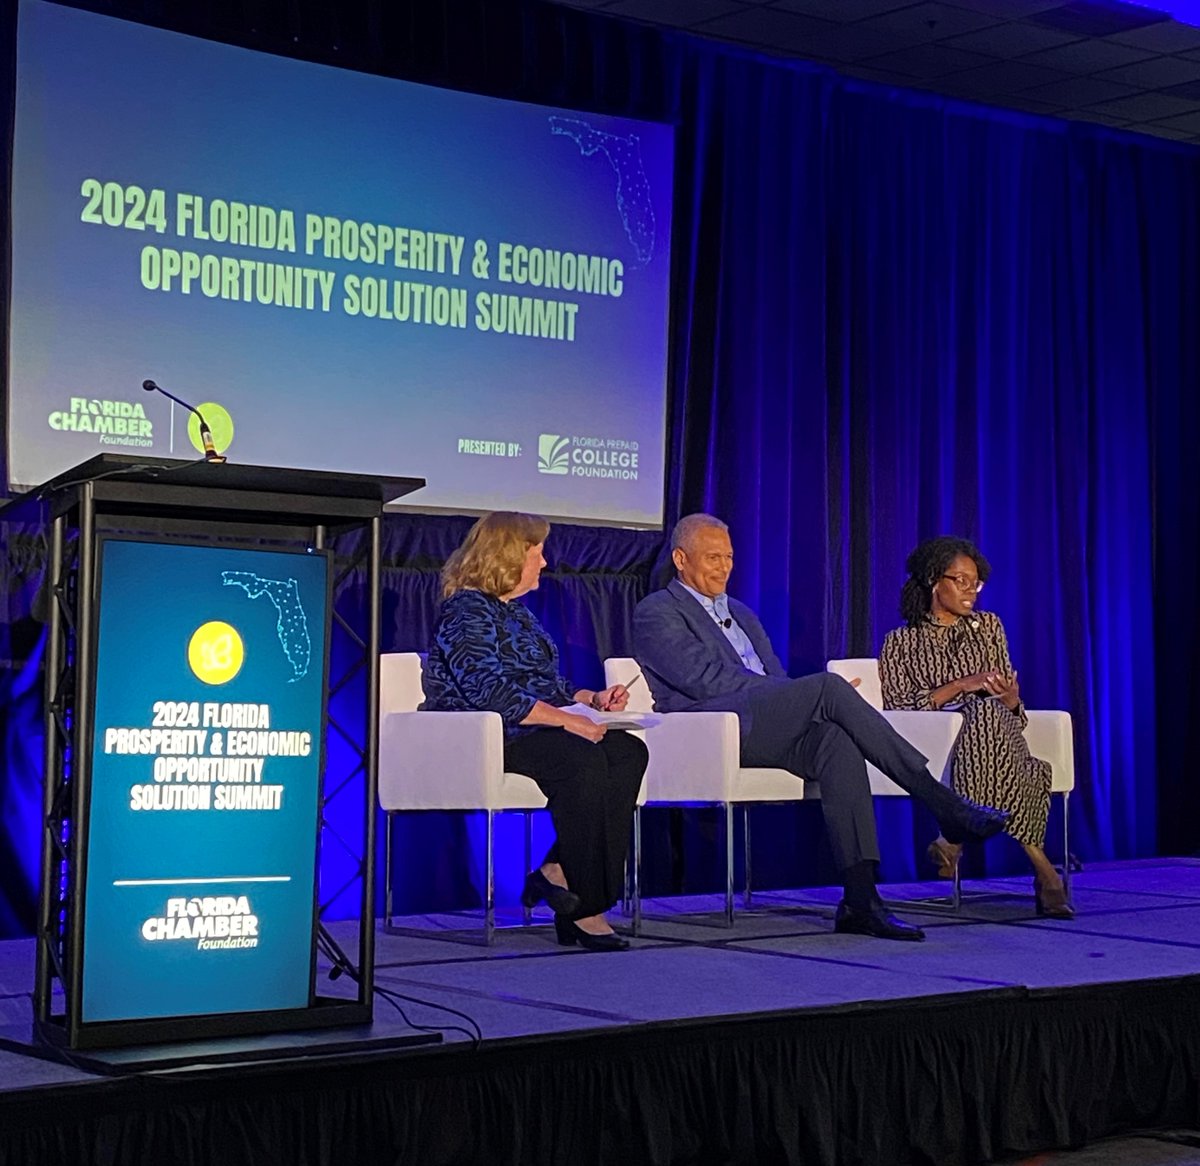 Did you know that half of all Florida children living in poverty live in just 15% of Florida's 983 zip codes? @SusanTowler of @FLBlue, Eddy Moratin of @LiftOrlando and Dr. Germaine Smith-Baugh of @ULBroward join us at the #ProsperitySummit to share the promising and replicable